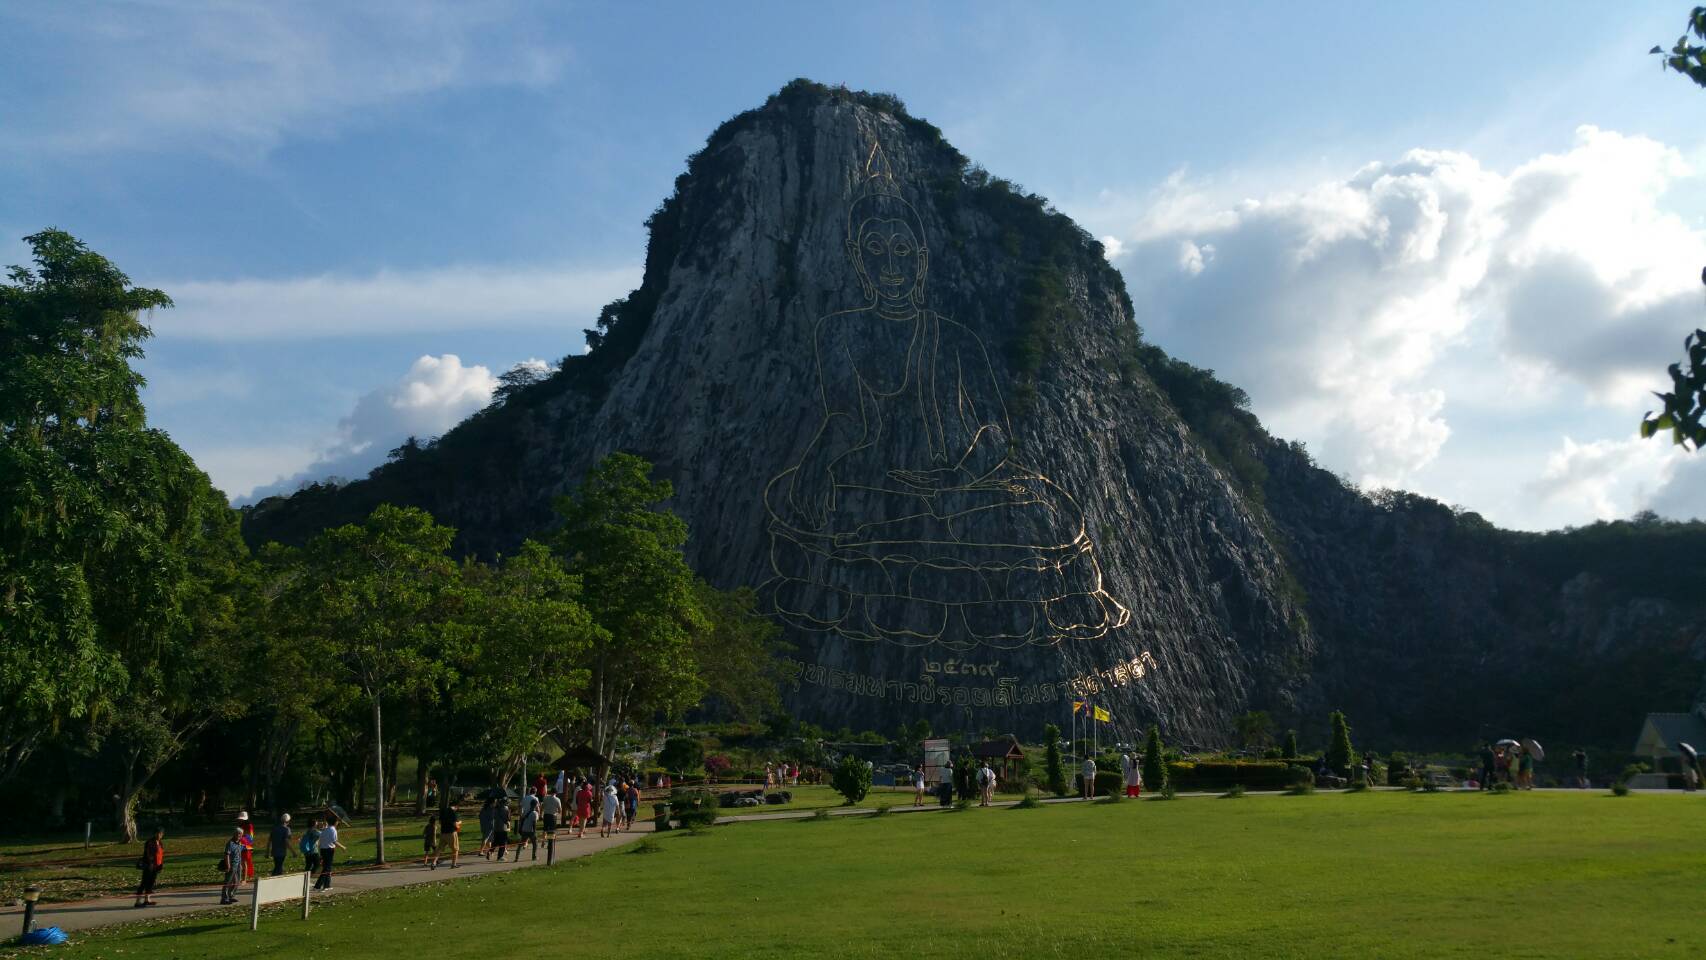 Not every tourist came to Pattaya armed with a water gun for Songkran. Some went to Khao Chee Chan, where a large image of Lord Buddha is carved into the side of the mountain.